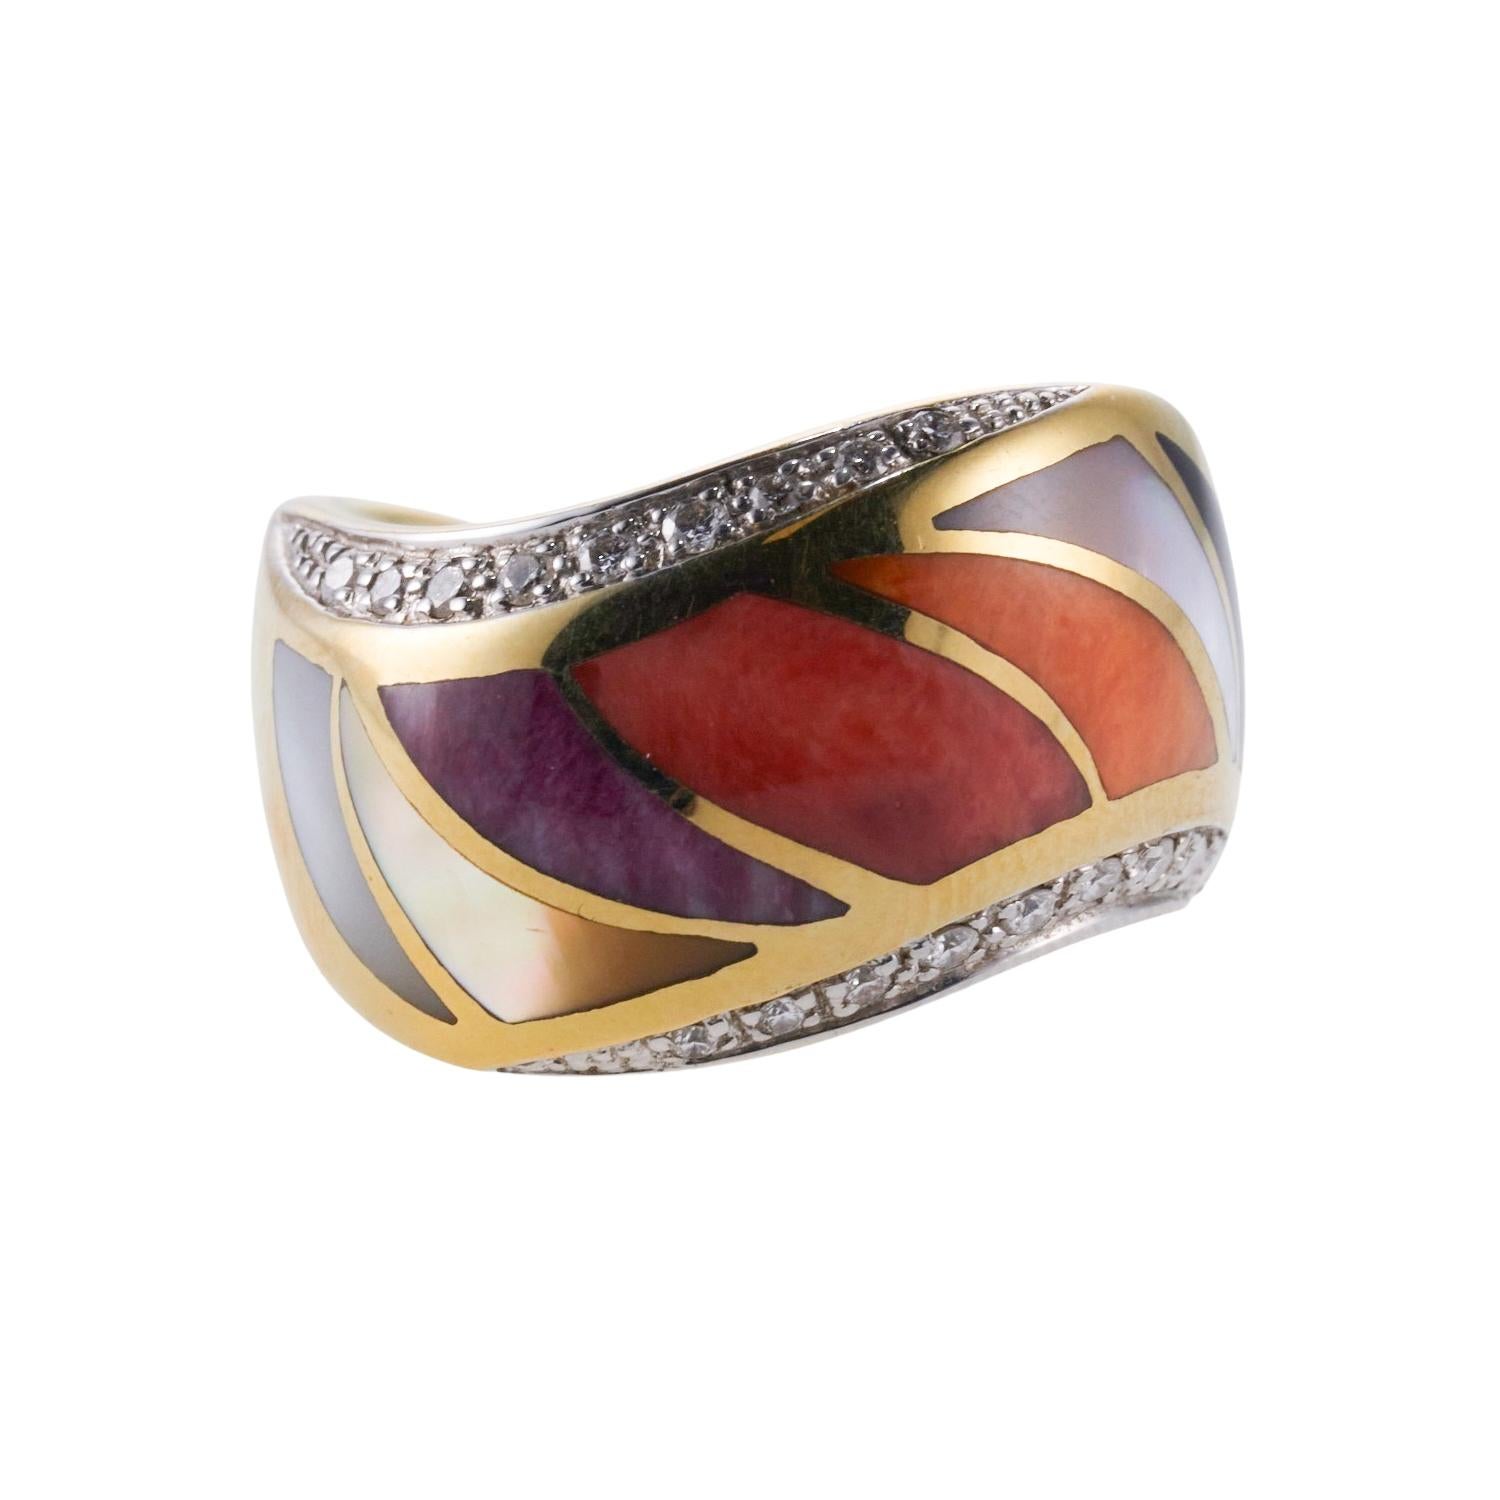 A 14k yellow gold ring set with inlay coral, MOP, sugilite and approx. 0.09ctw H/VS diamonds. Ring size 6.5, top is 13mm wide. 12.8 grams.